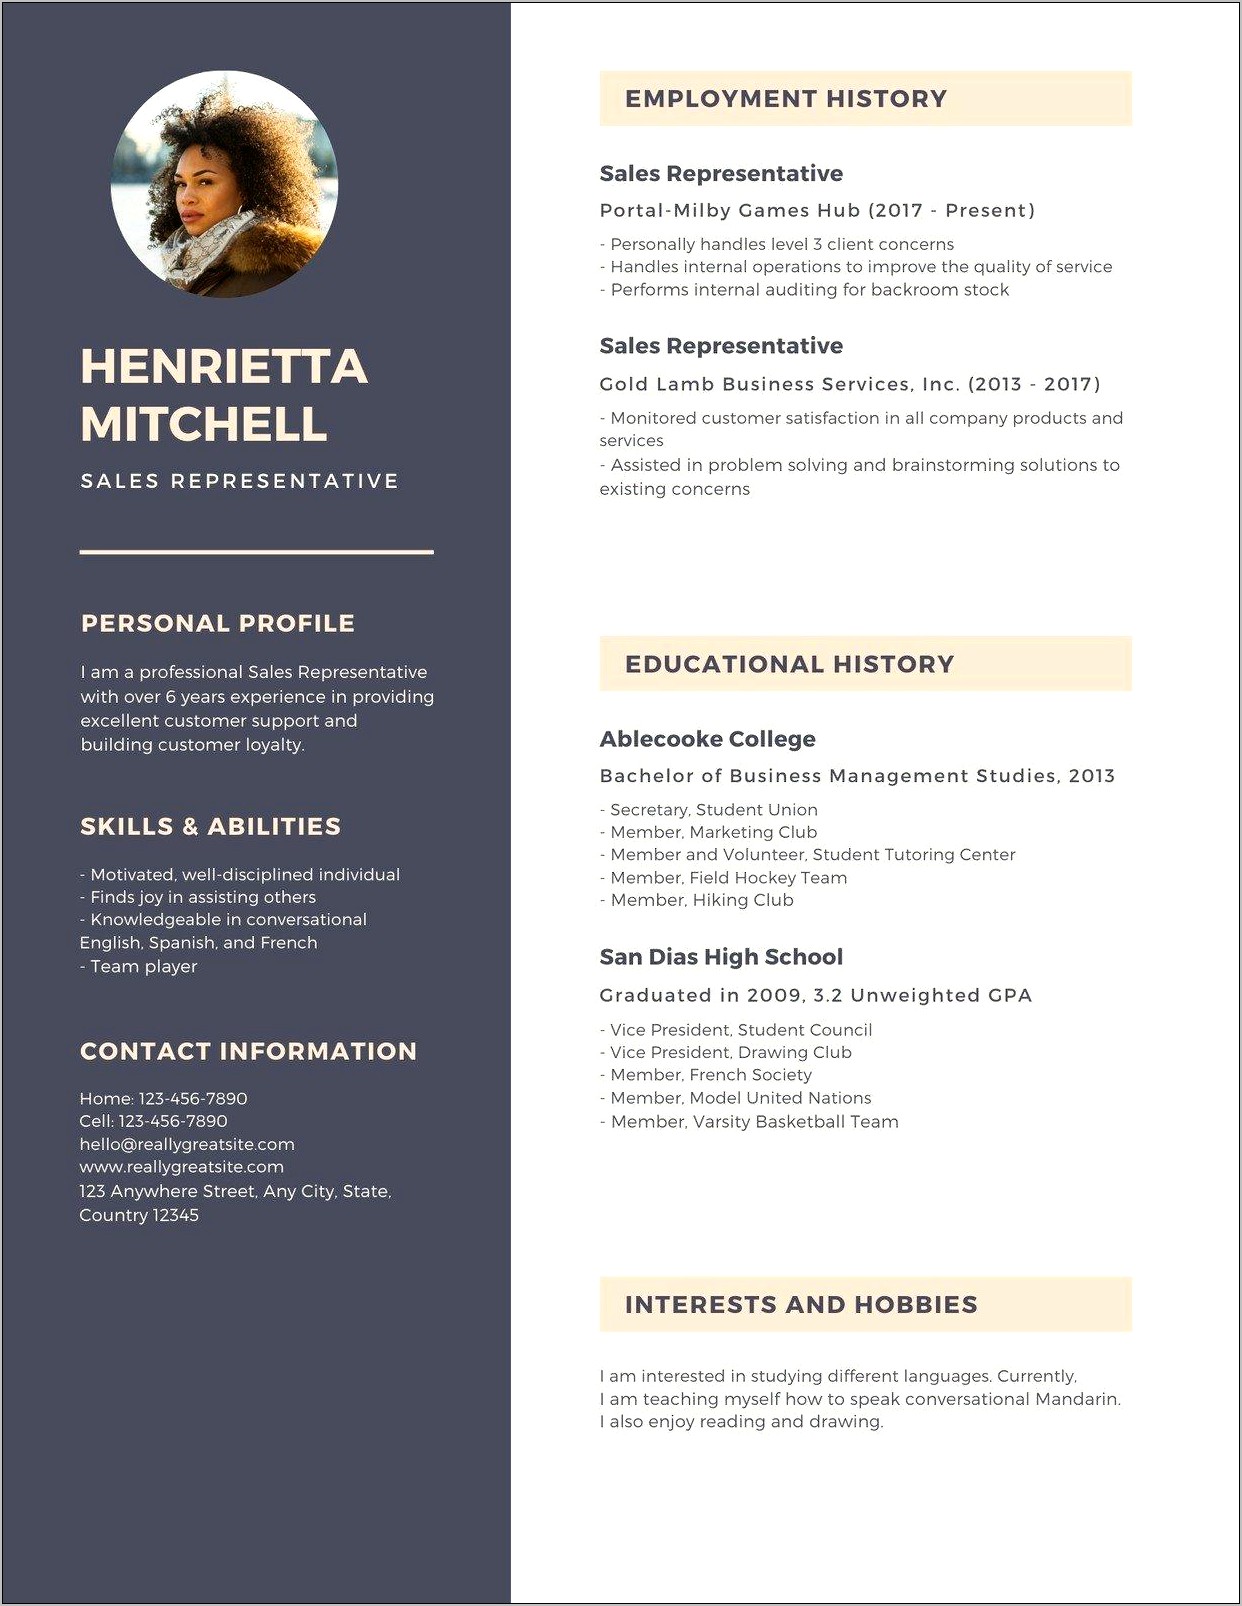 Resume For Single Woman With No Job Experience